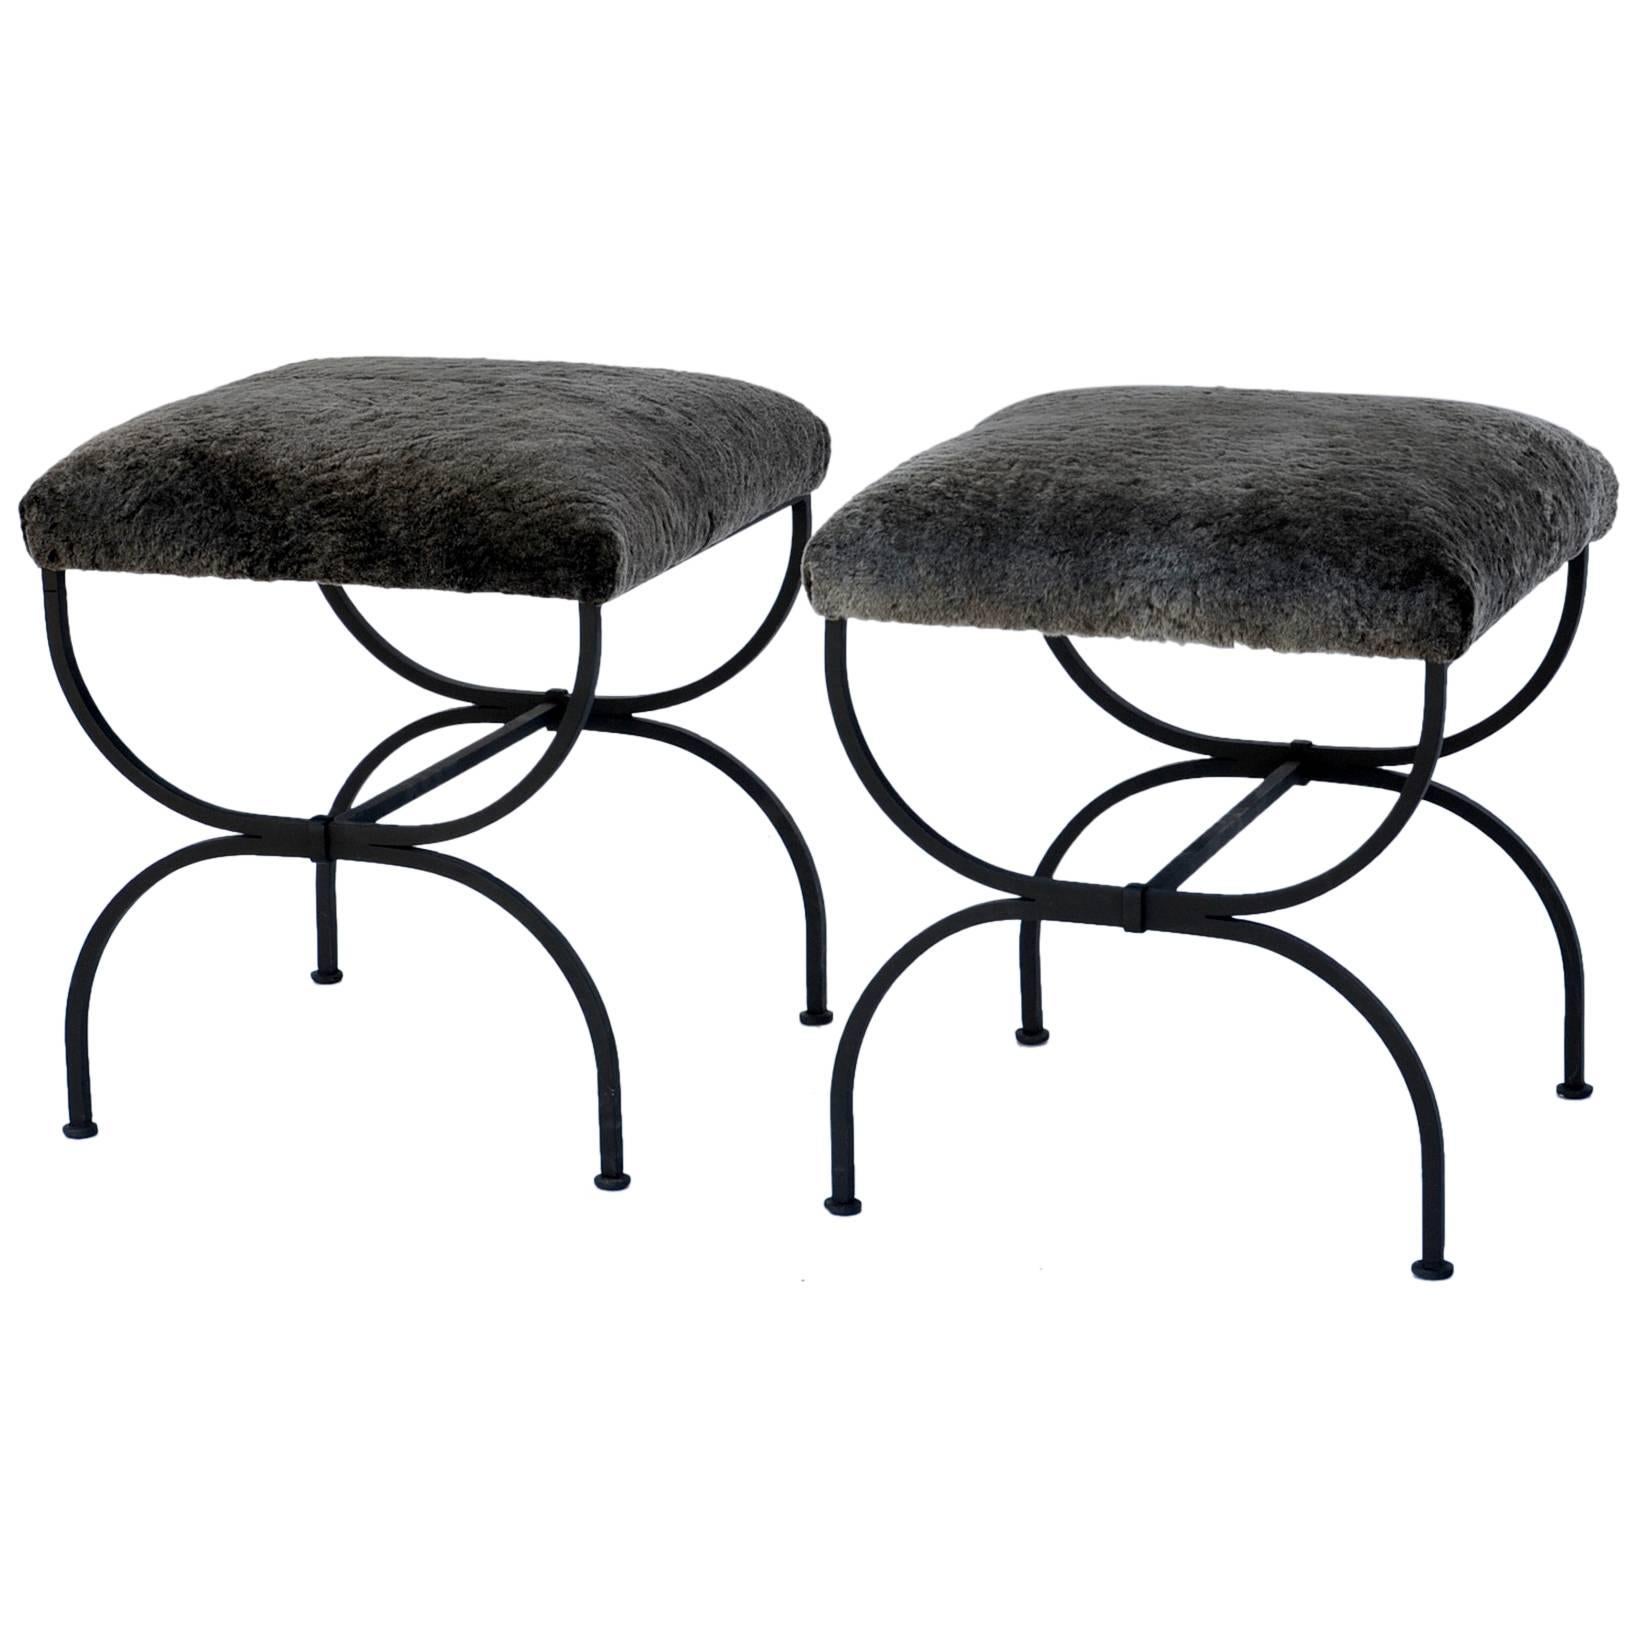 Pair of Chic Fur-Covered Wrought Iron Stools in the Style of Gilbert Poillerat